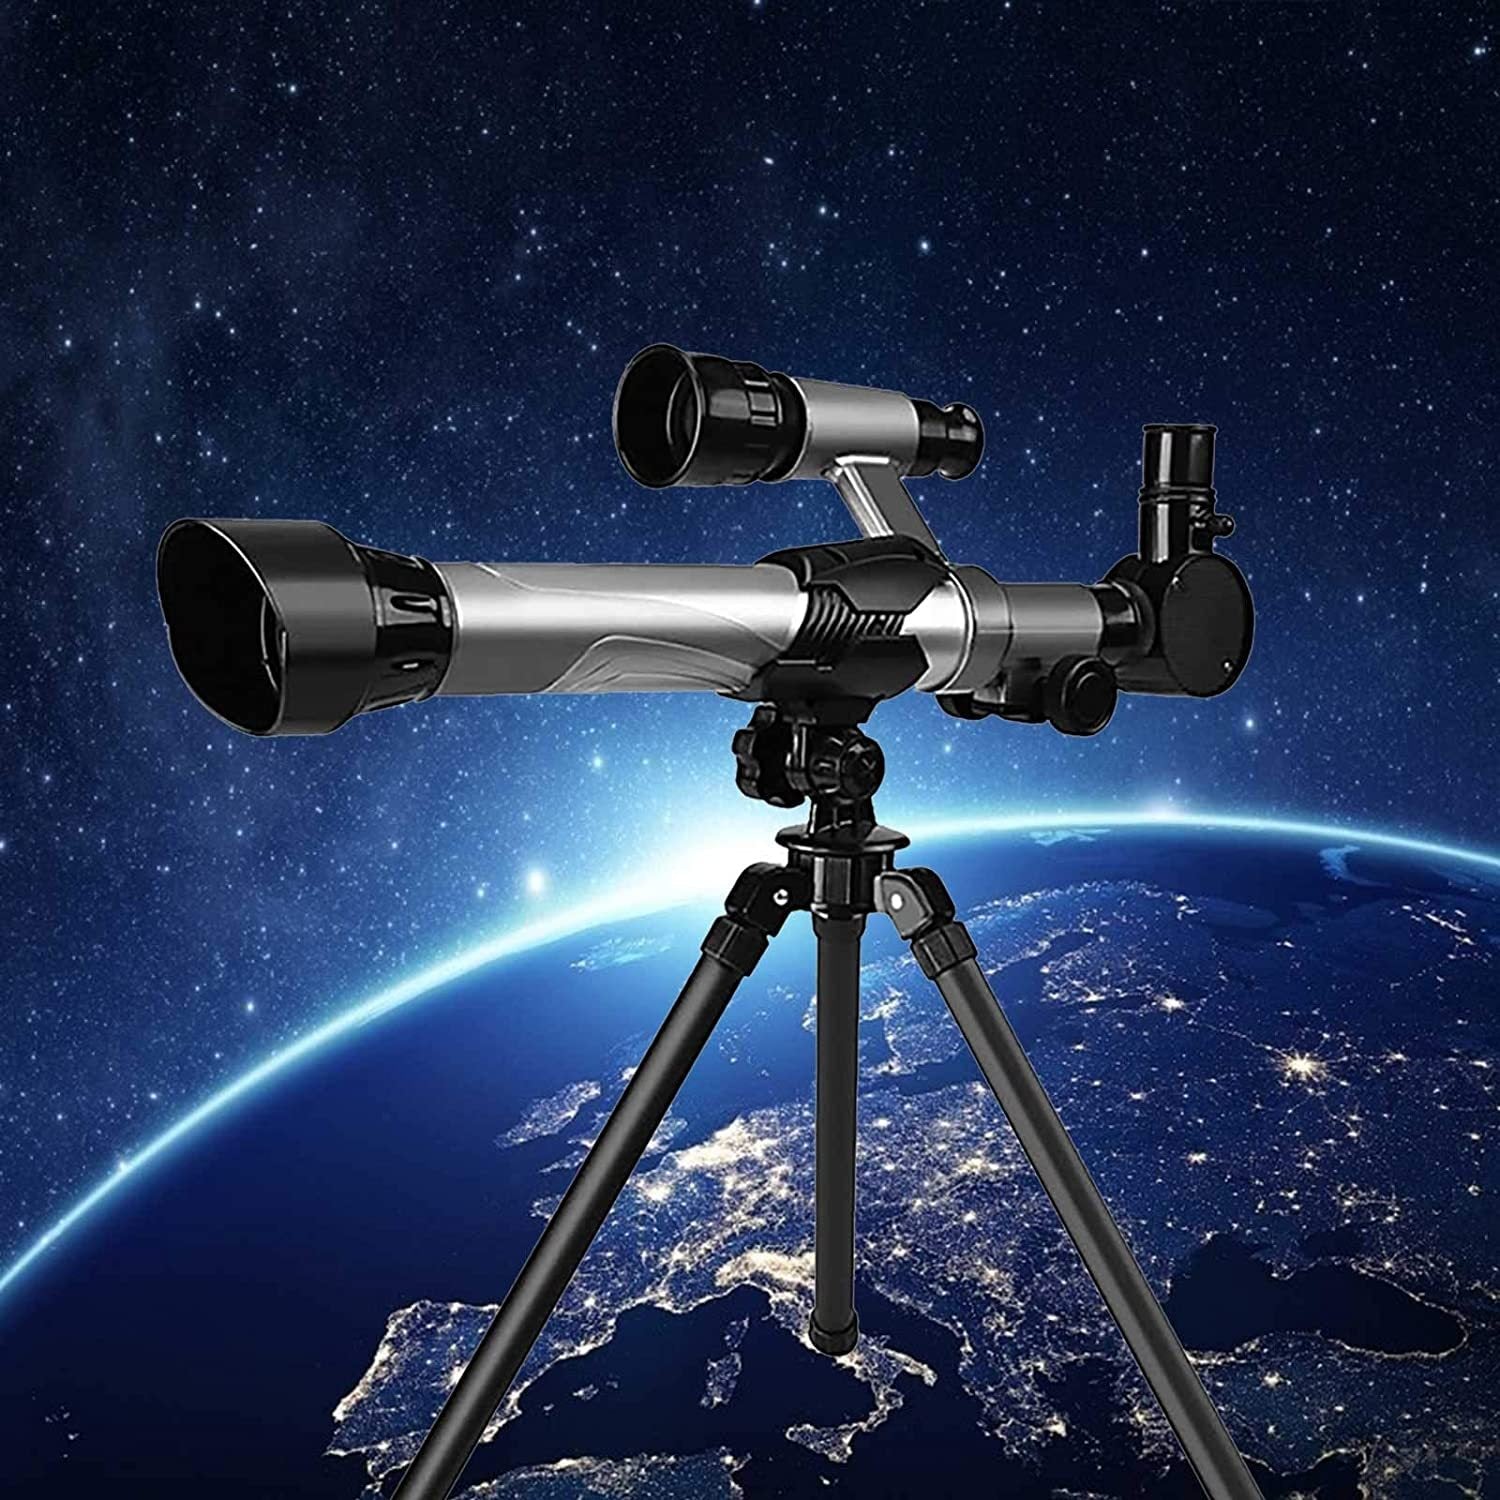 Telescopes for Adult and Kids, 50mm Aperture Telescope with Tripod, Astronomical Refracting Telescope Astronomy Professional Gifts for Astronomy Beginners, Telescope with 3 Magnification Eyepieces